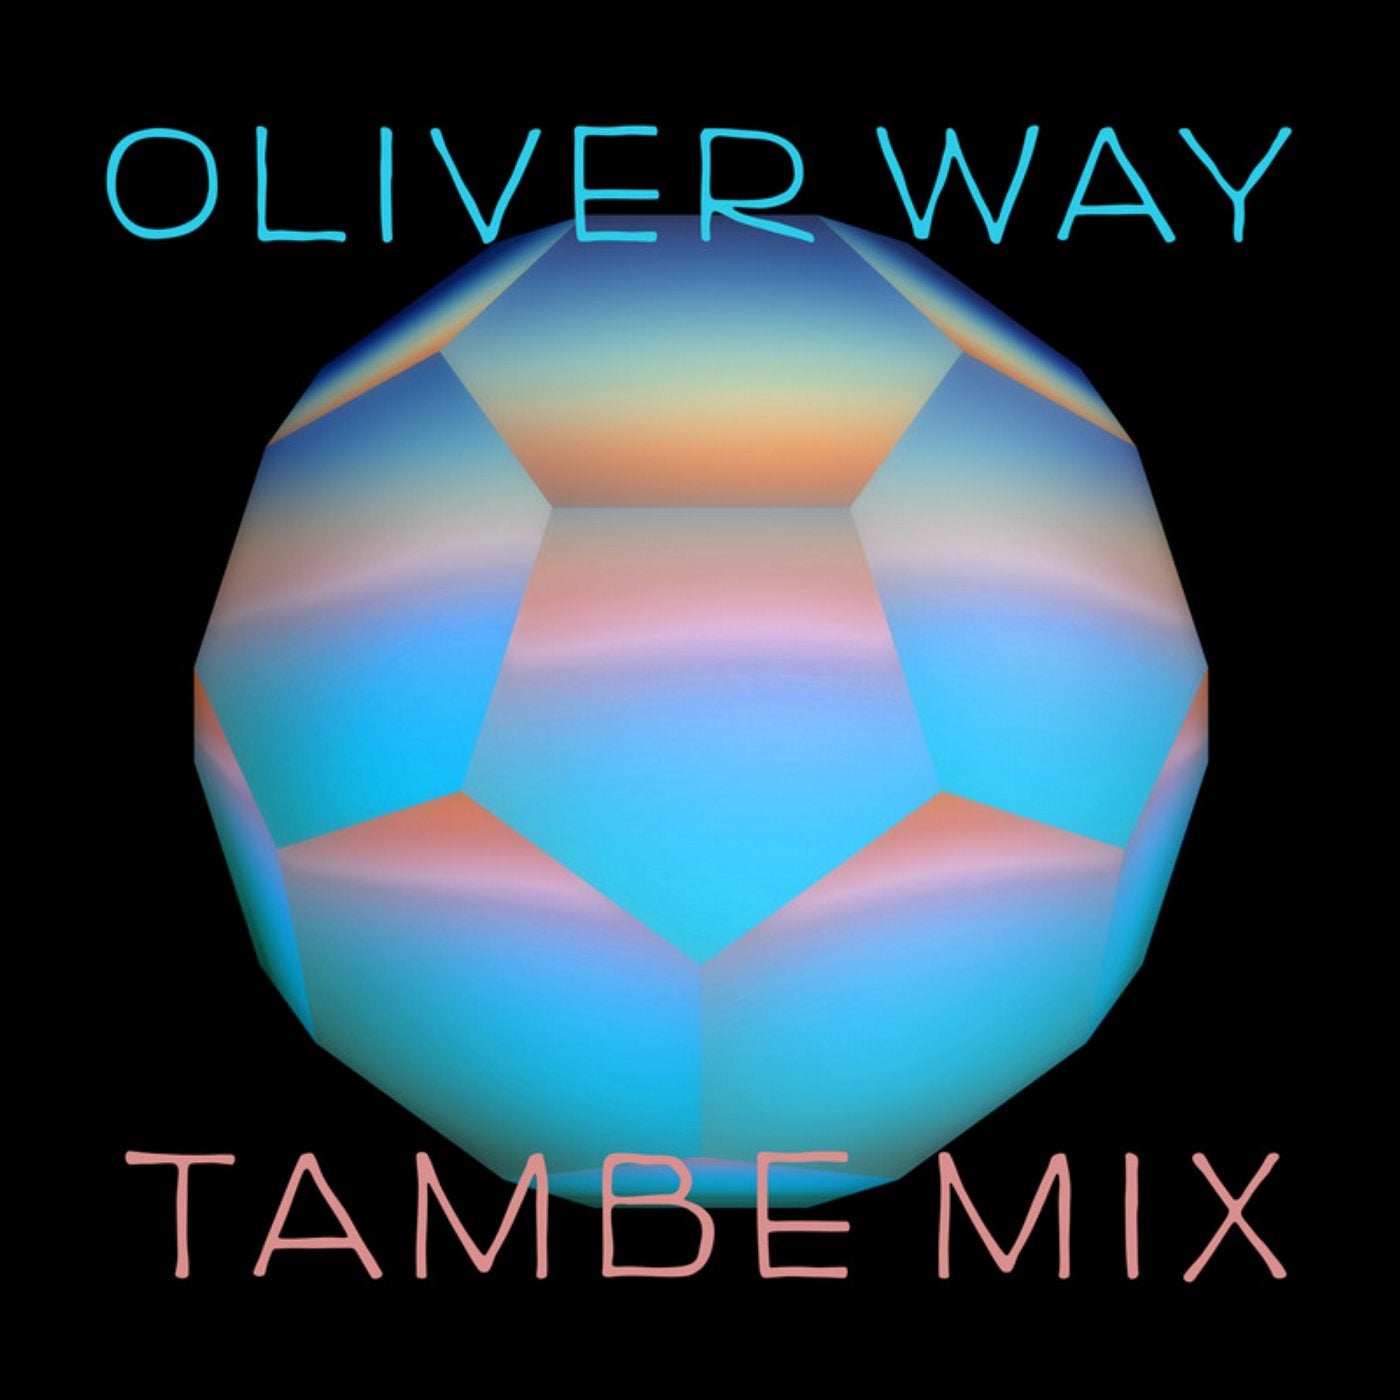 Tambe Mix by Oliver Way